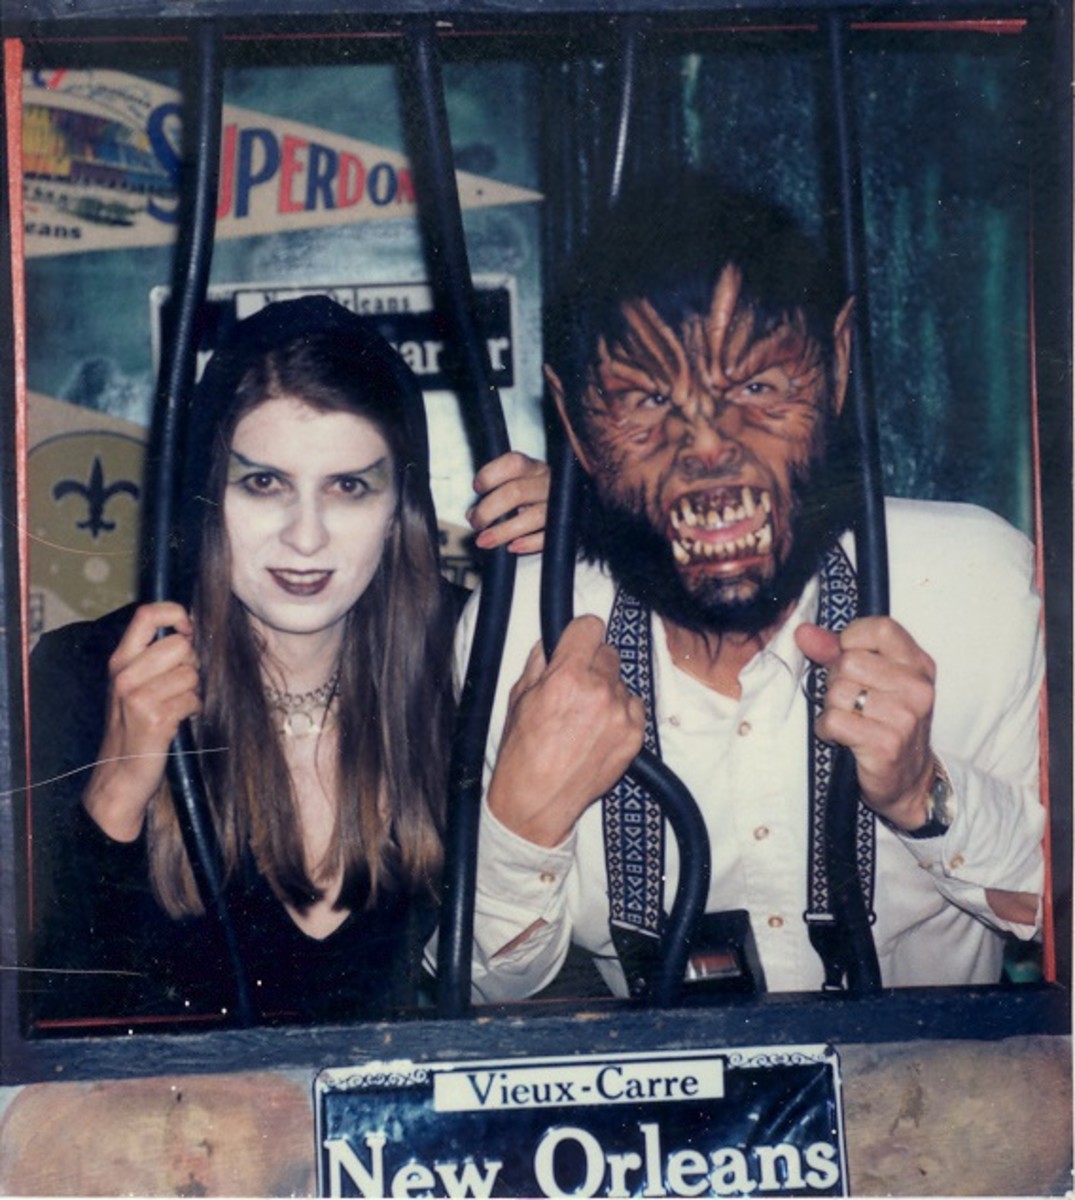 Our couples costumes on All Hallowed's Eve - a vamp and the wolfman. Everyone has their picture taken here in the French Quarter at least once in their life.